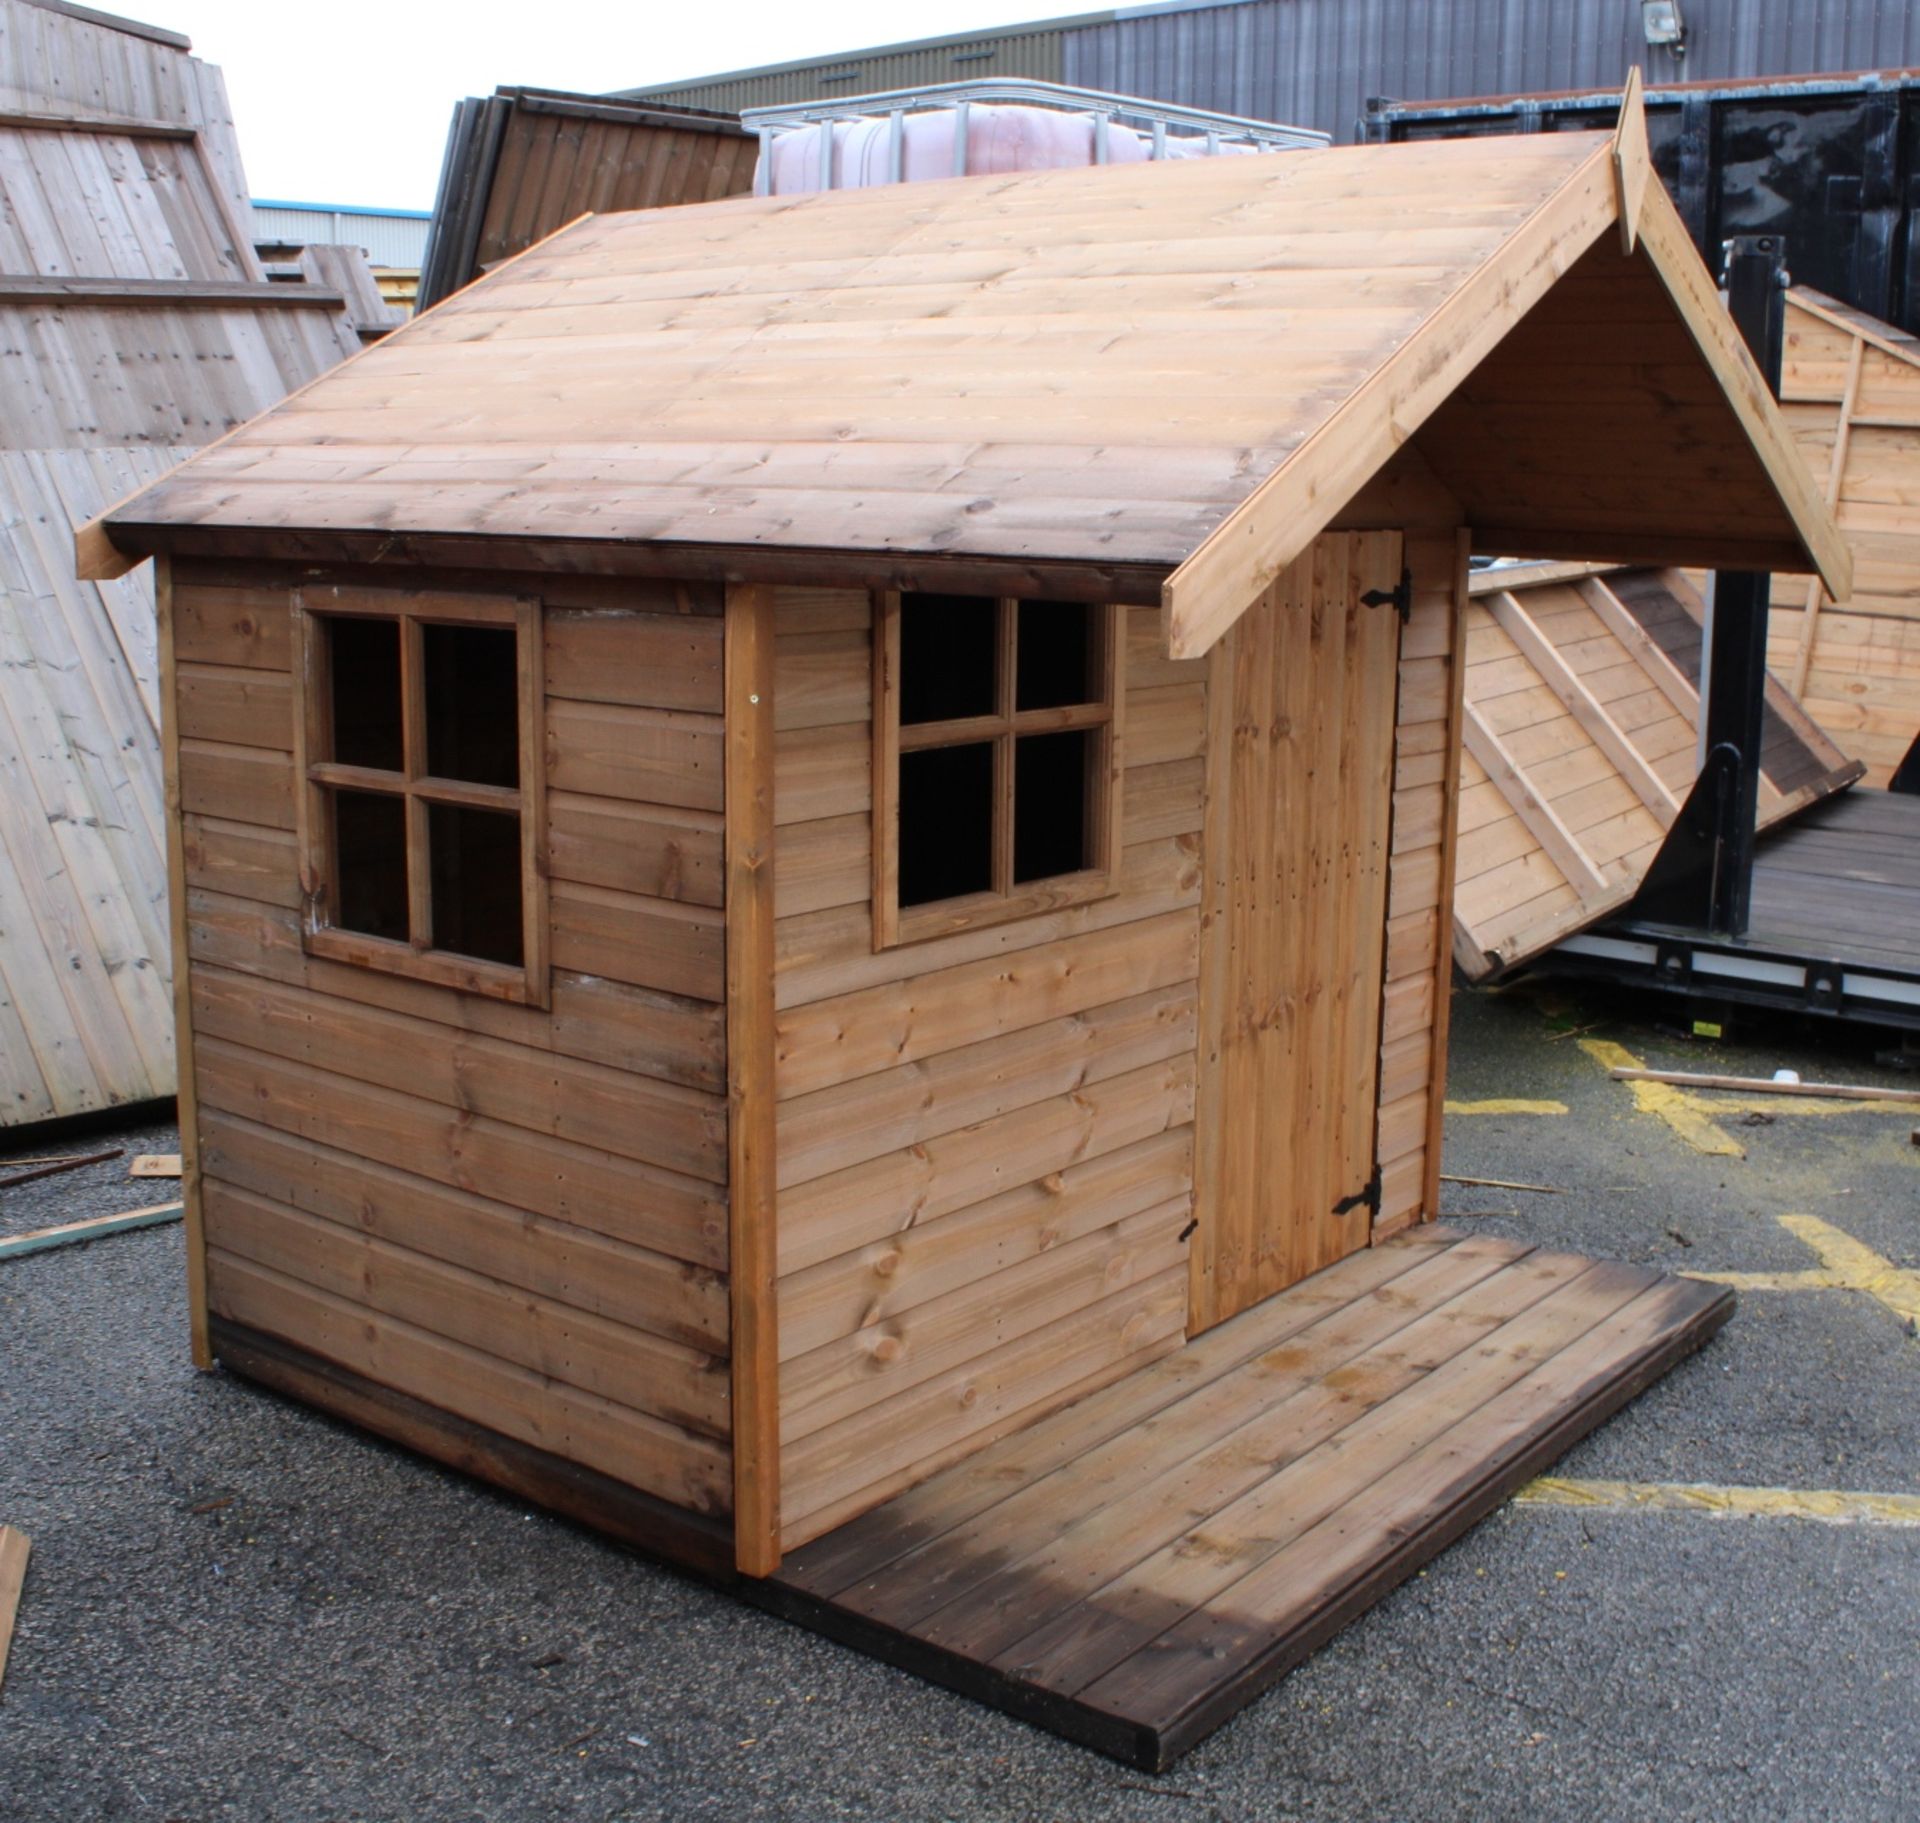 4x6 kids playhouse with overhang and veranda, Stnadrad 16mm Nominal Cladding - Image 2 of 5